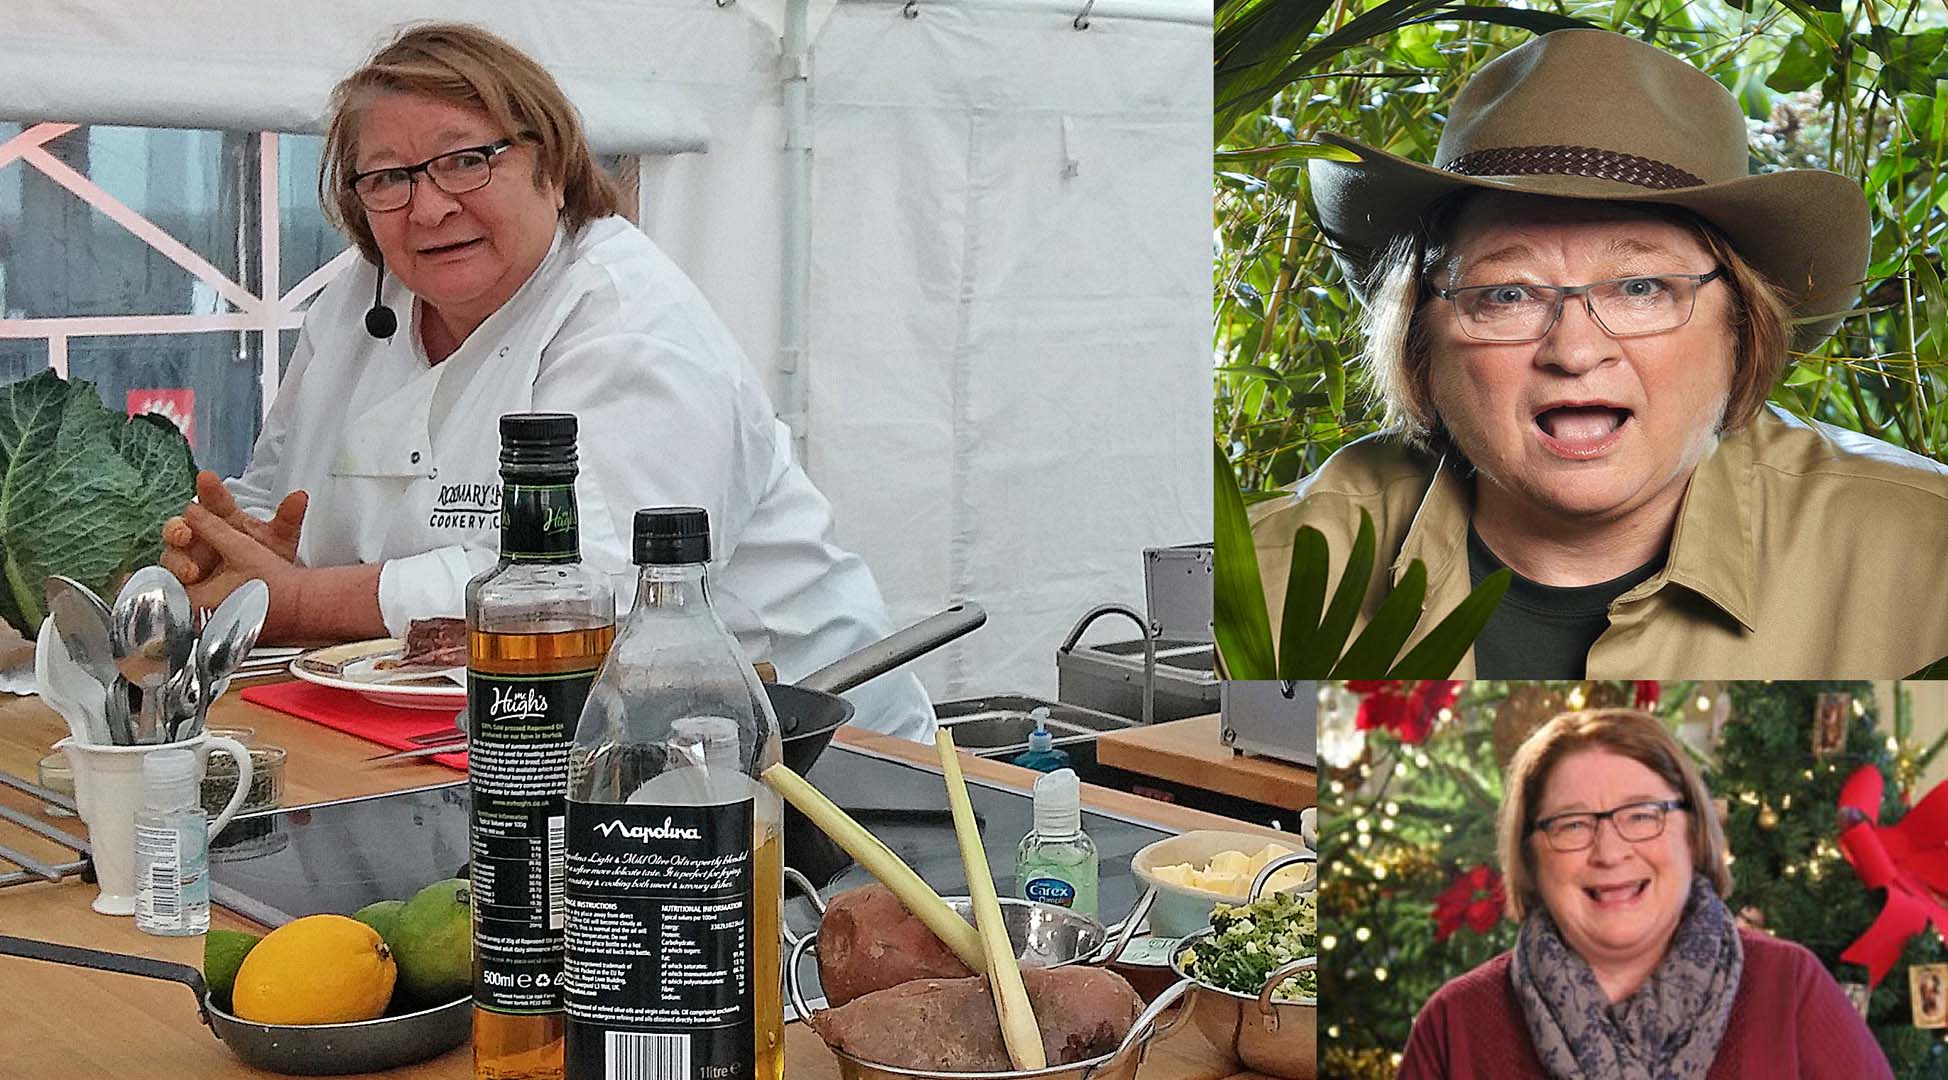 Celebrity Chef Rosemary Shrager cooking at Watford Market